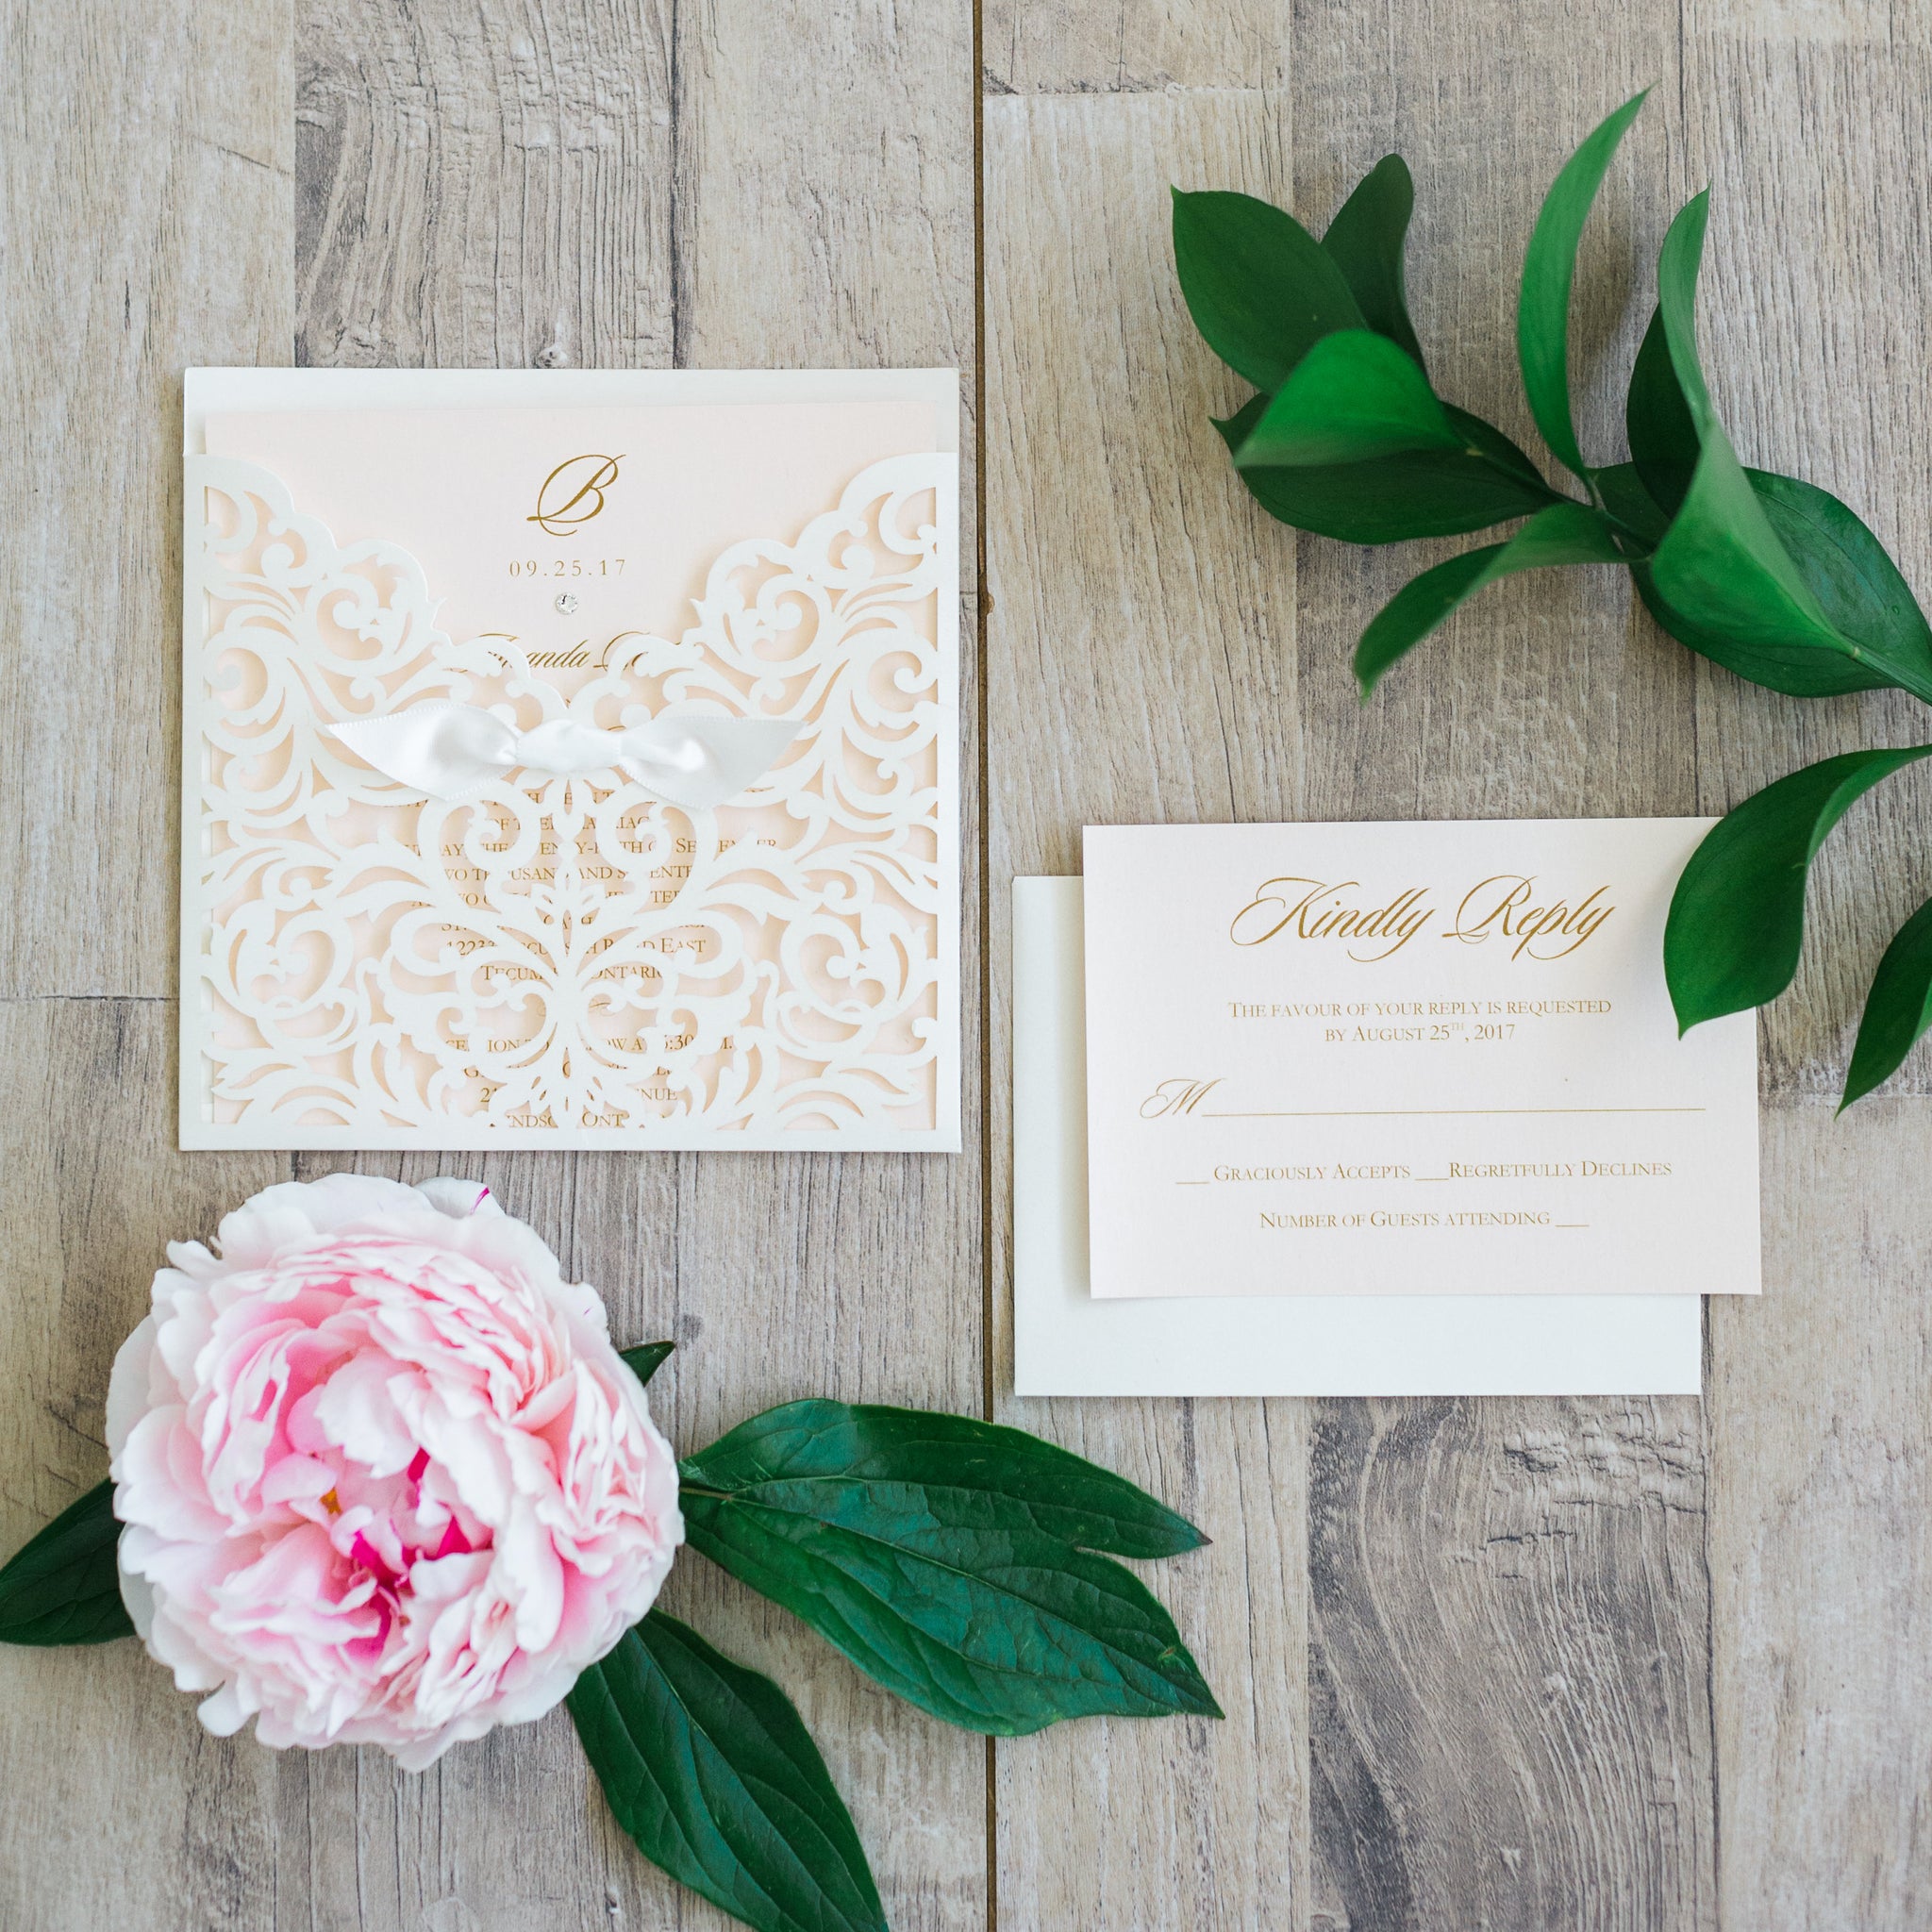 alt="Elegant ivory pearlescent shimmer square pocket laser cut wedding invitation features a rich ivory satin ribbon bow and a soft pink pearlescent shimmer card stock insert with monogram and jewel detail and gold font"